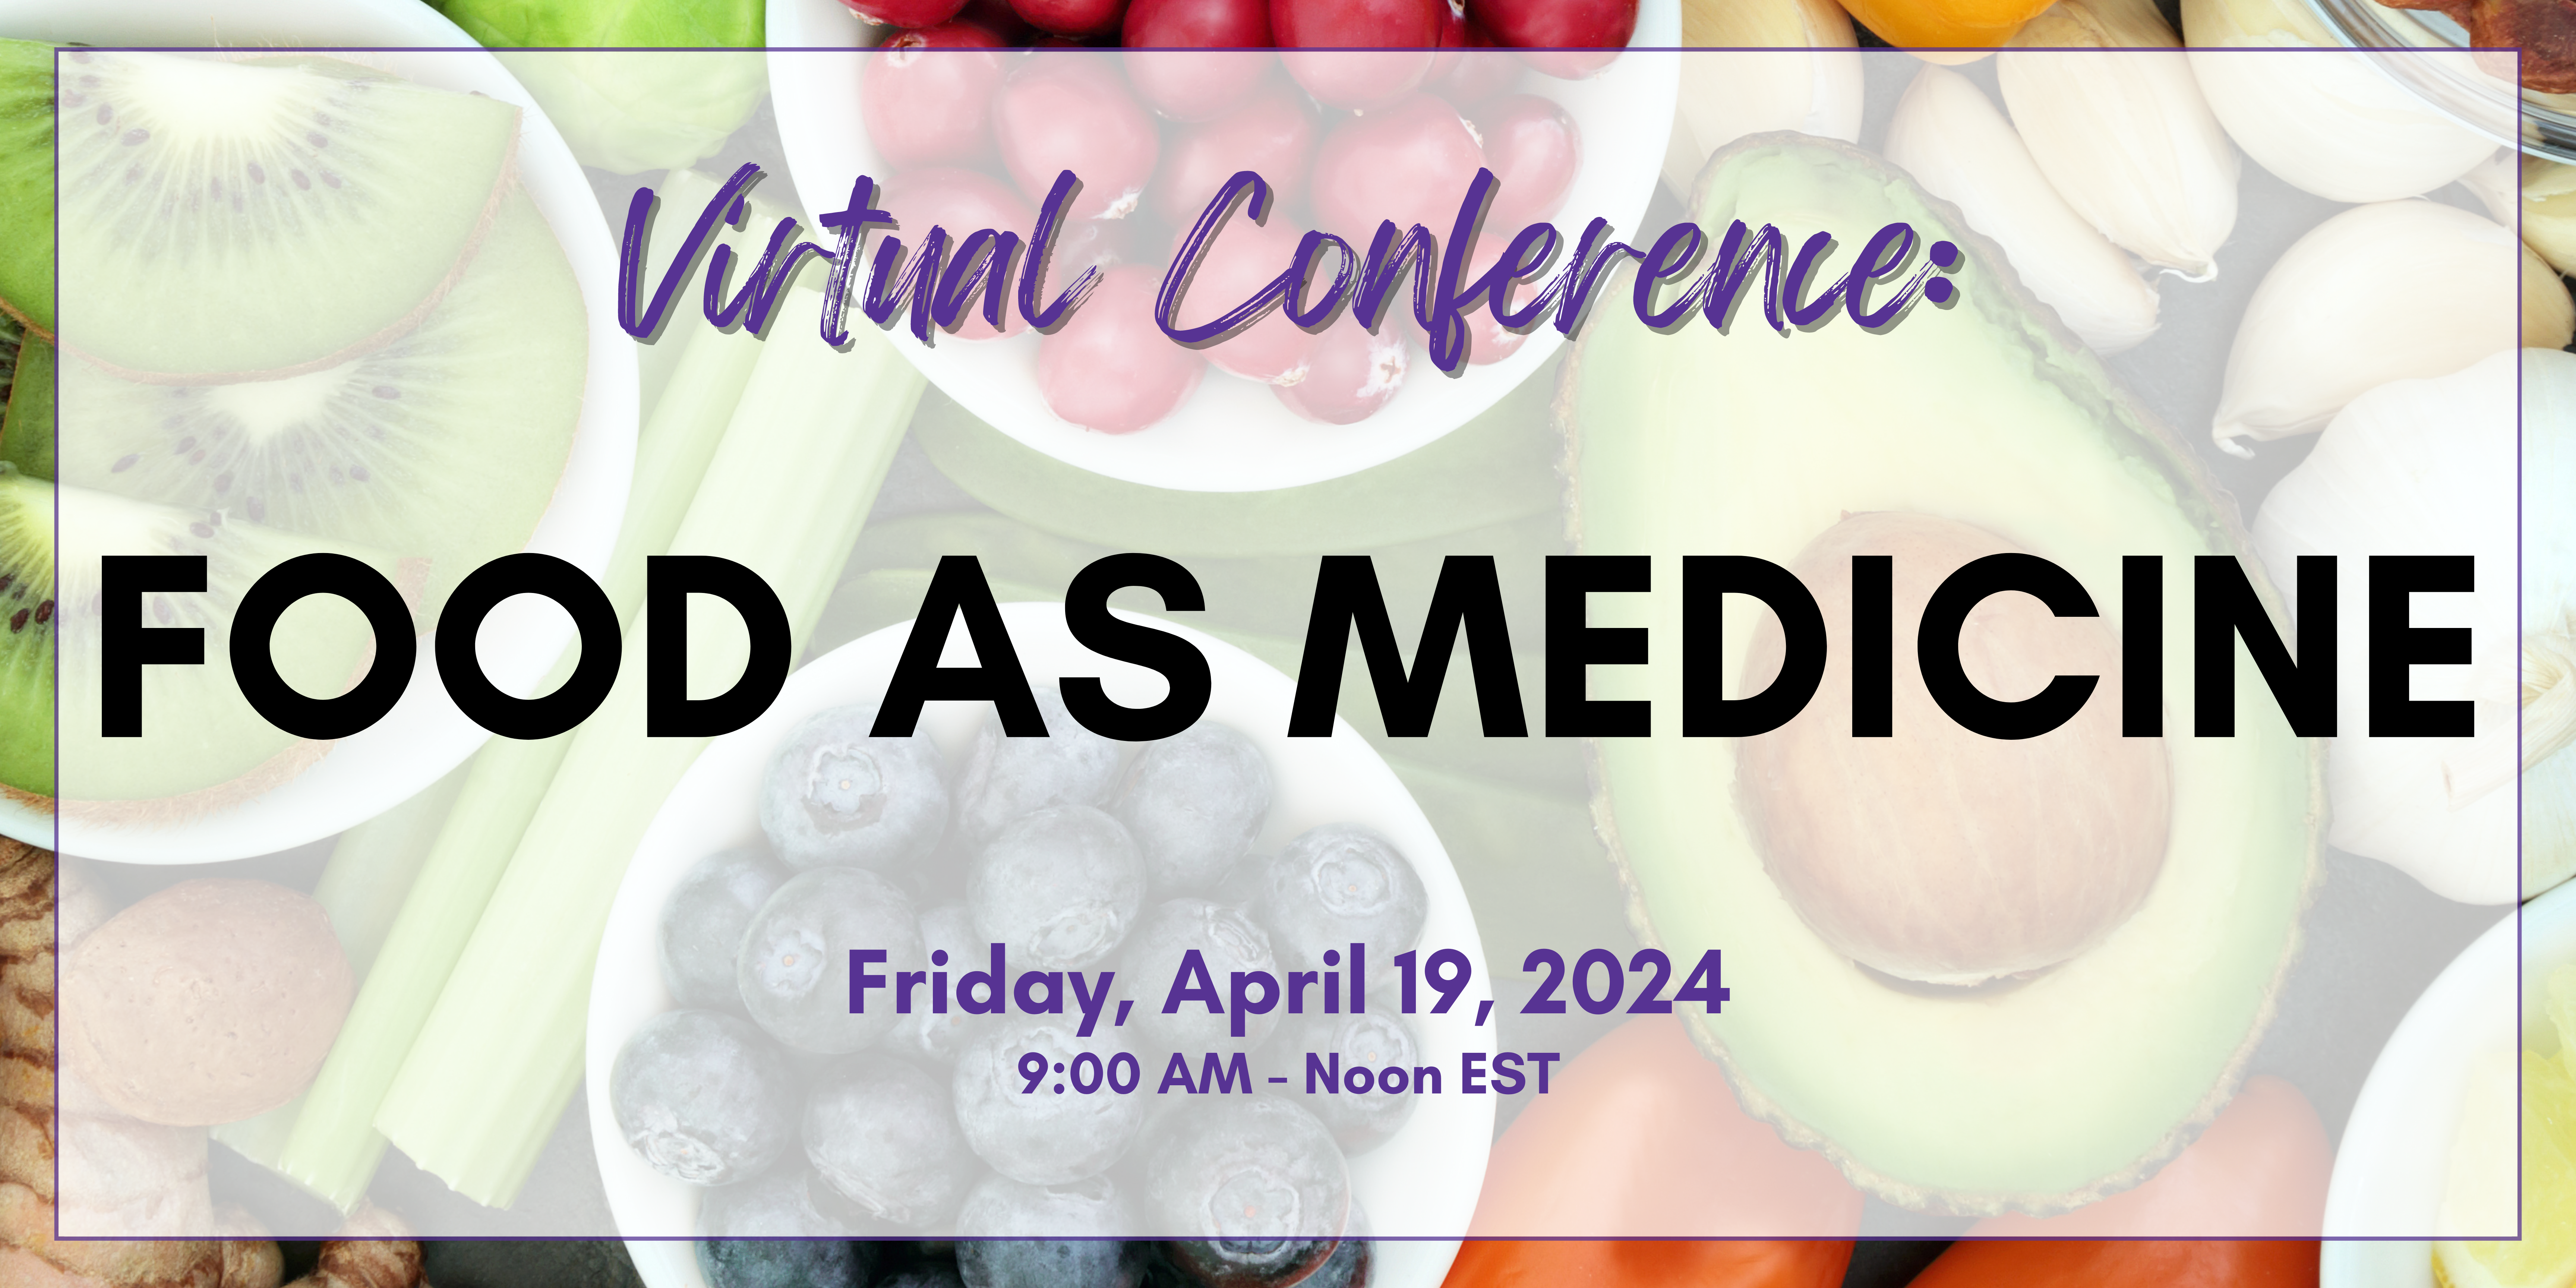 food as medicine graphic with healthy foods behind the name, date, and time of the event